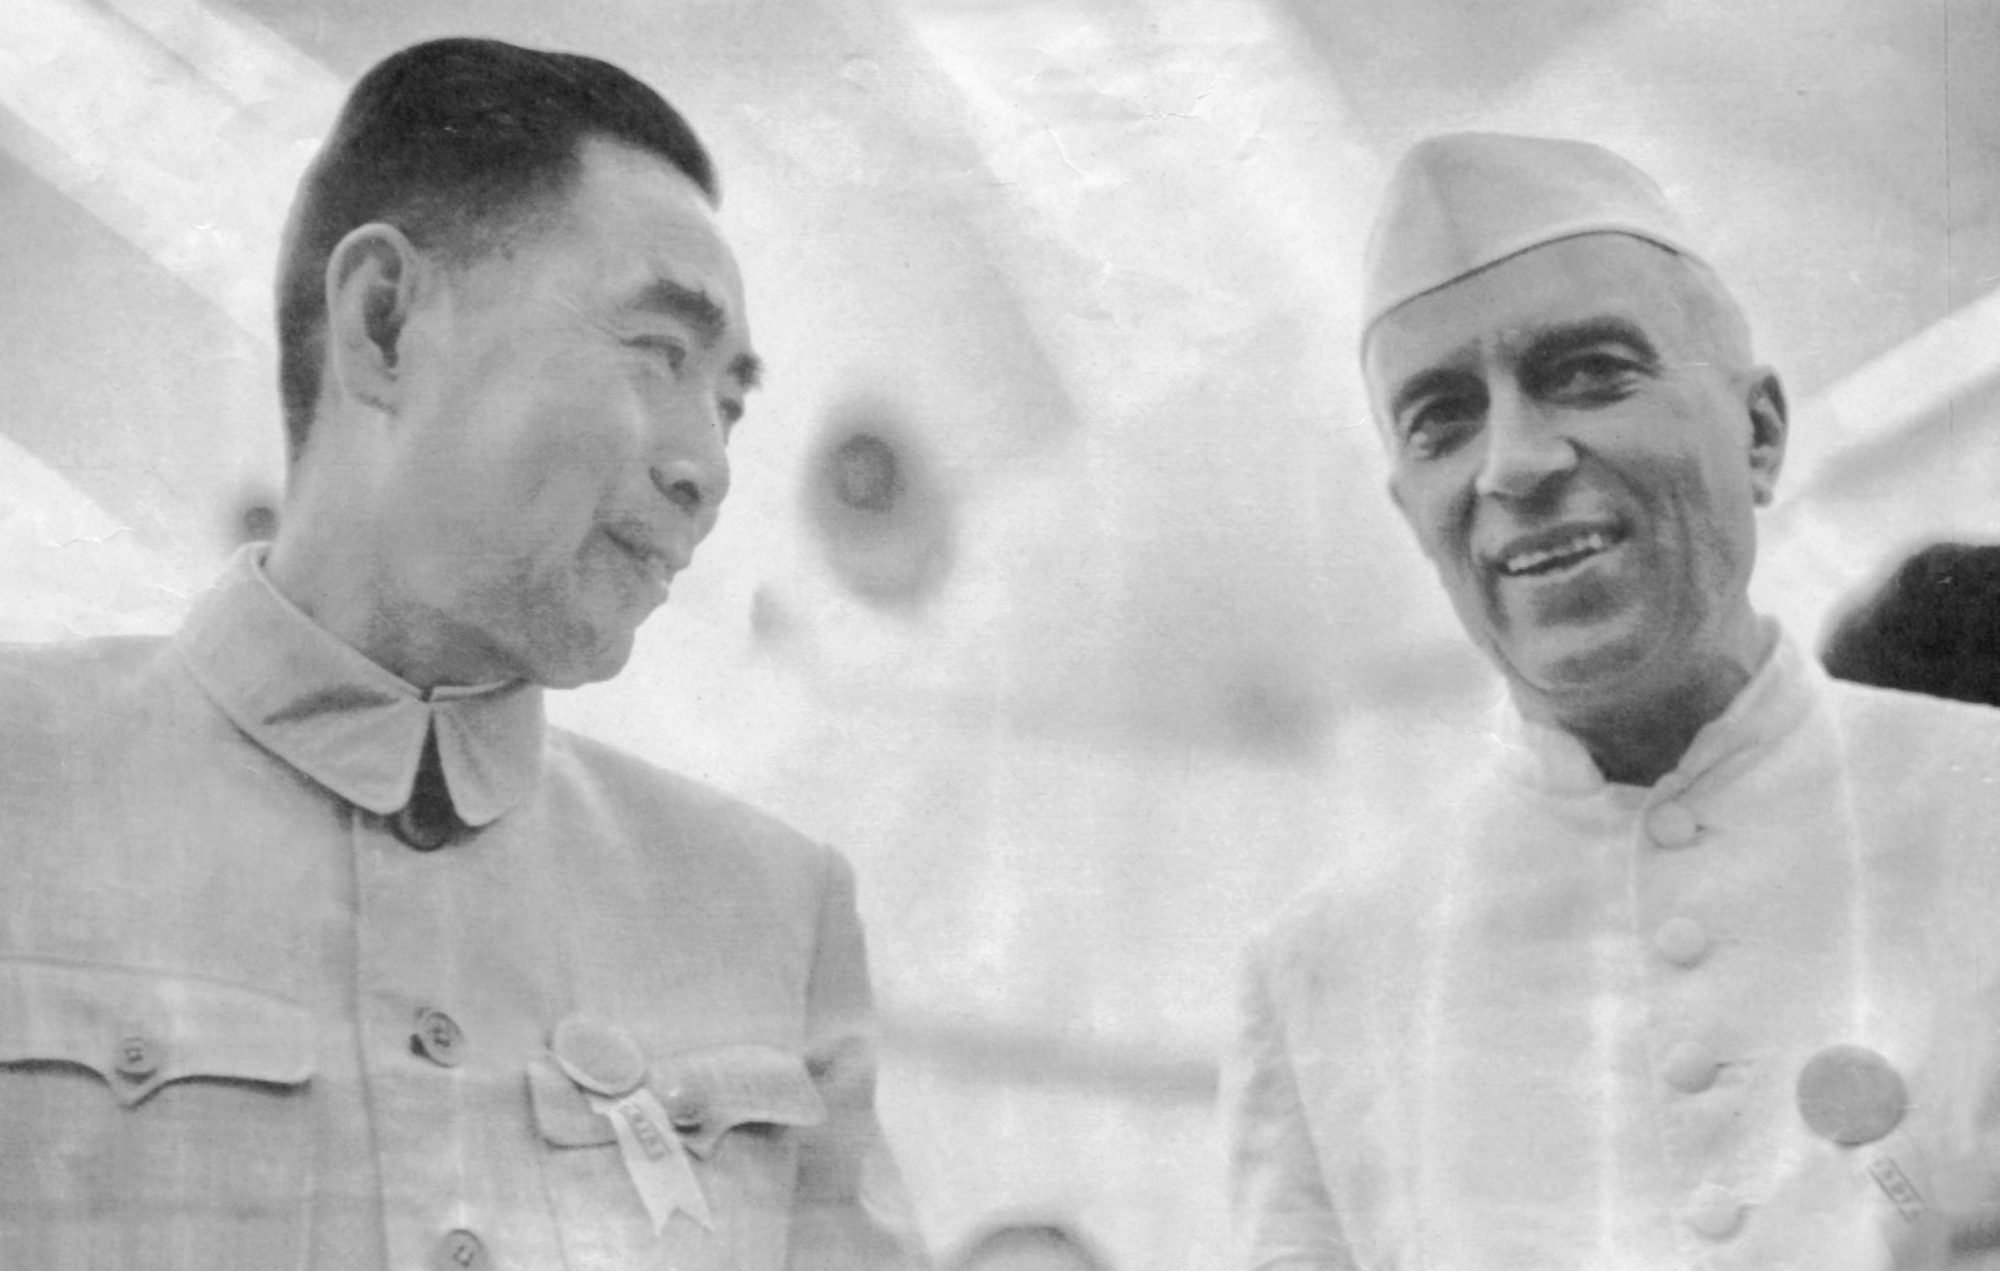 Chinese premier Zhou Enlai and Indian prime minister Jawaharlal Nehru at the Bandung Conference on April 23, 1955. Photo: UPI